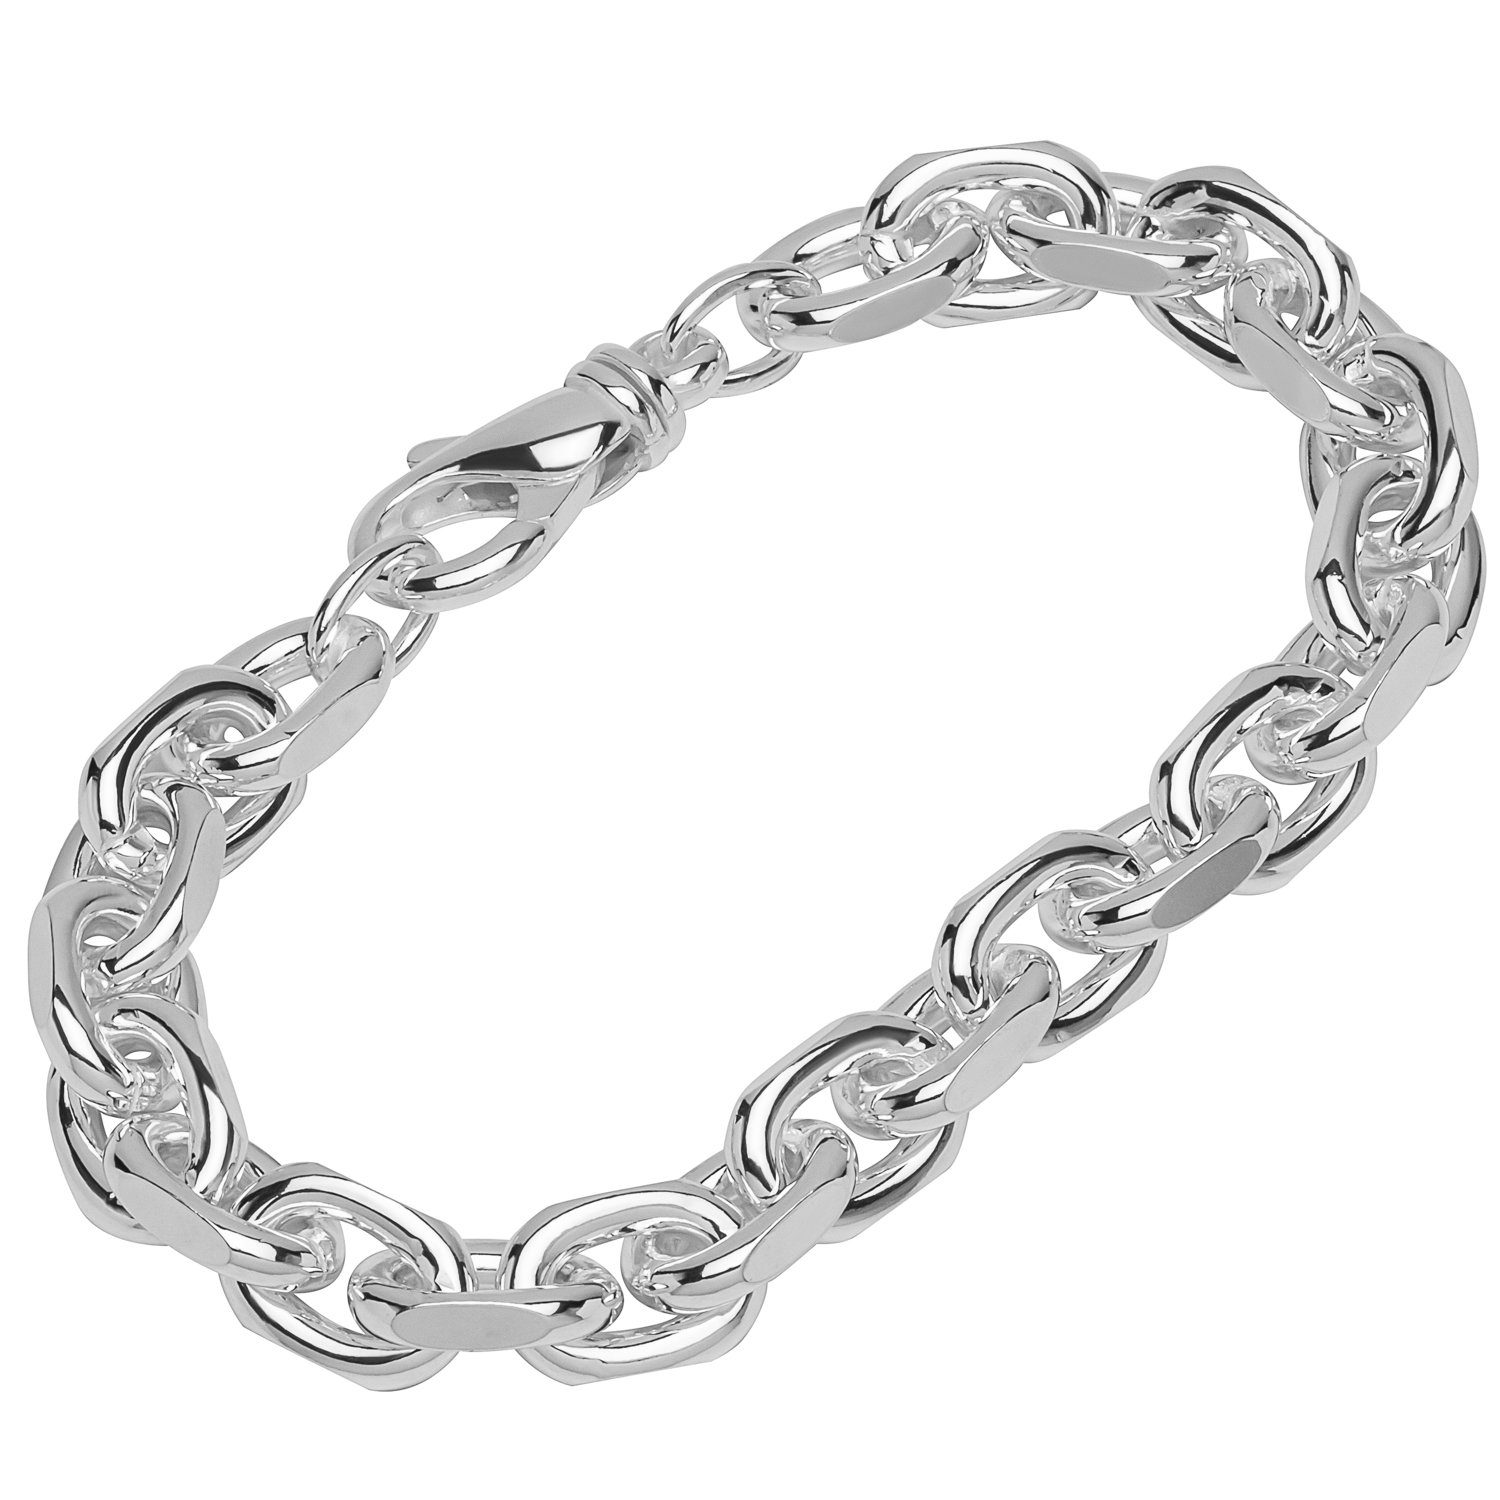 Armband seitli 22cm Silber Ankerkette in Germany Made 925 Silberarmband Stück), NKlaus (1 Sterling